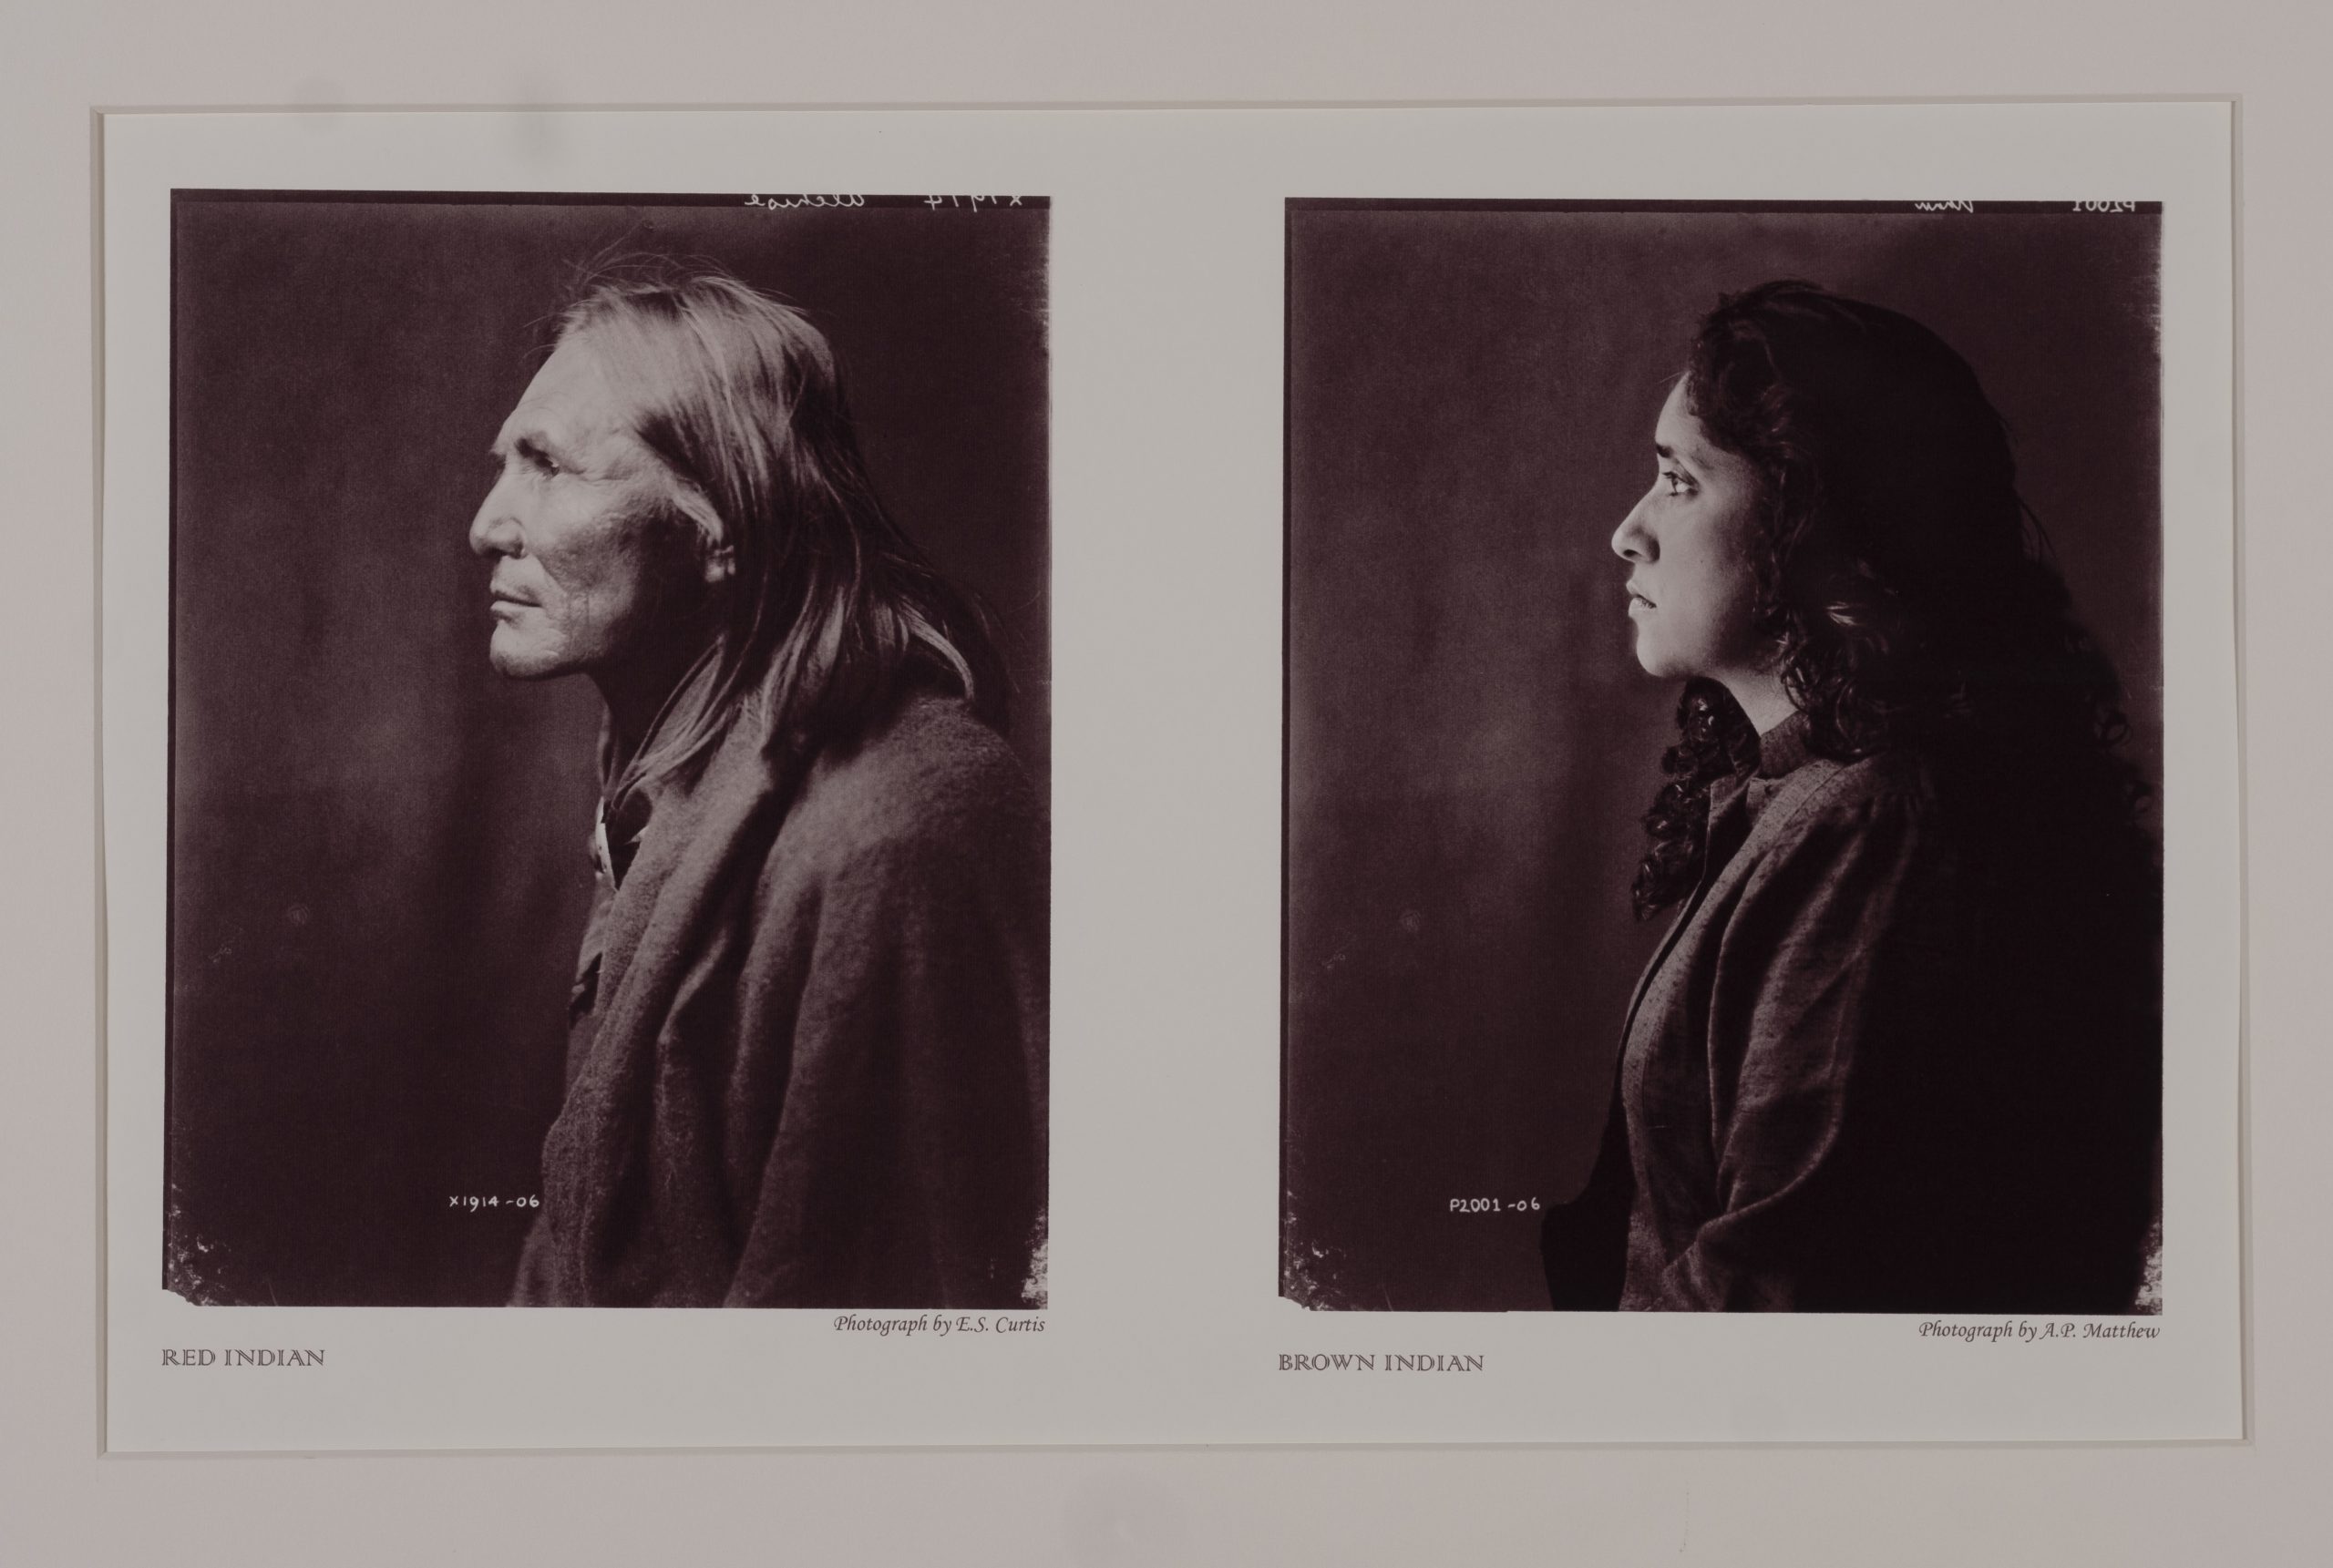 Two images, a man and a woman in the same position, facing left, light exposing the face. Under the man a cations reads, Red Indian, and under the woman a caption reads, Brown Indian.